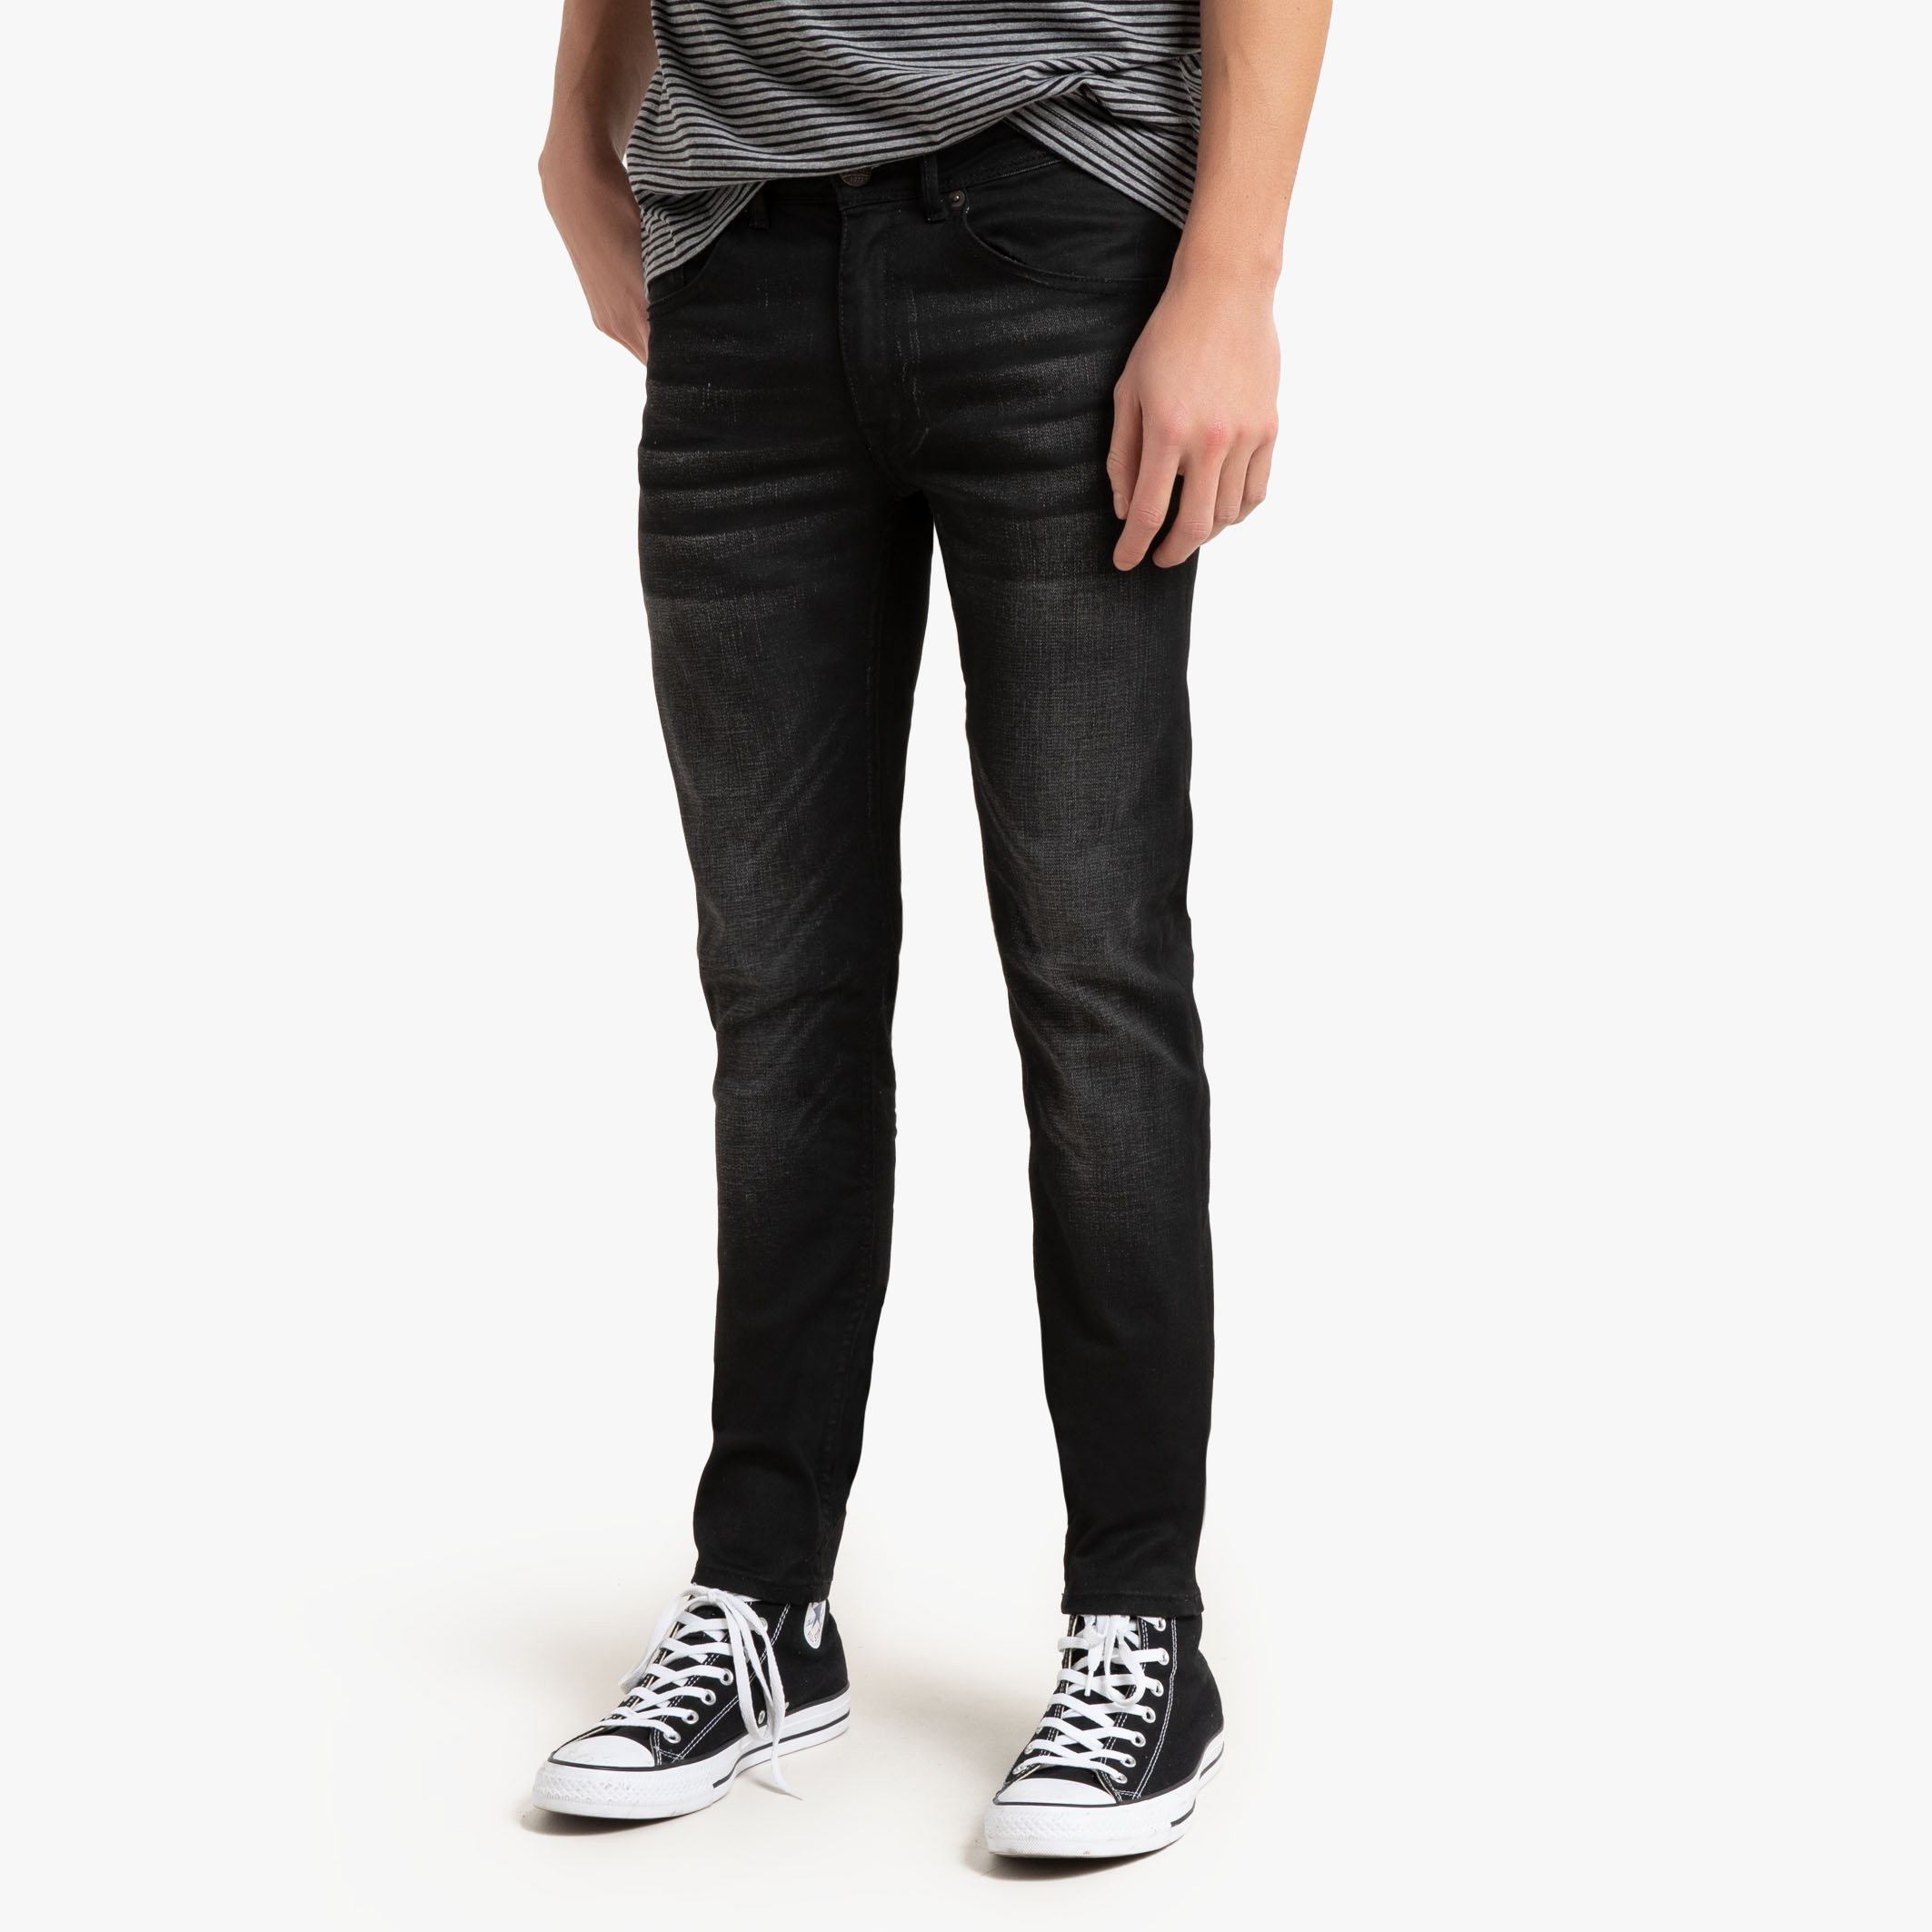 Precipice Immigration pull the wool over eyes Jean slim homme pas cher | La Redoute